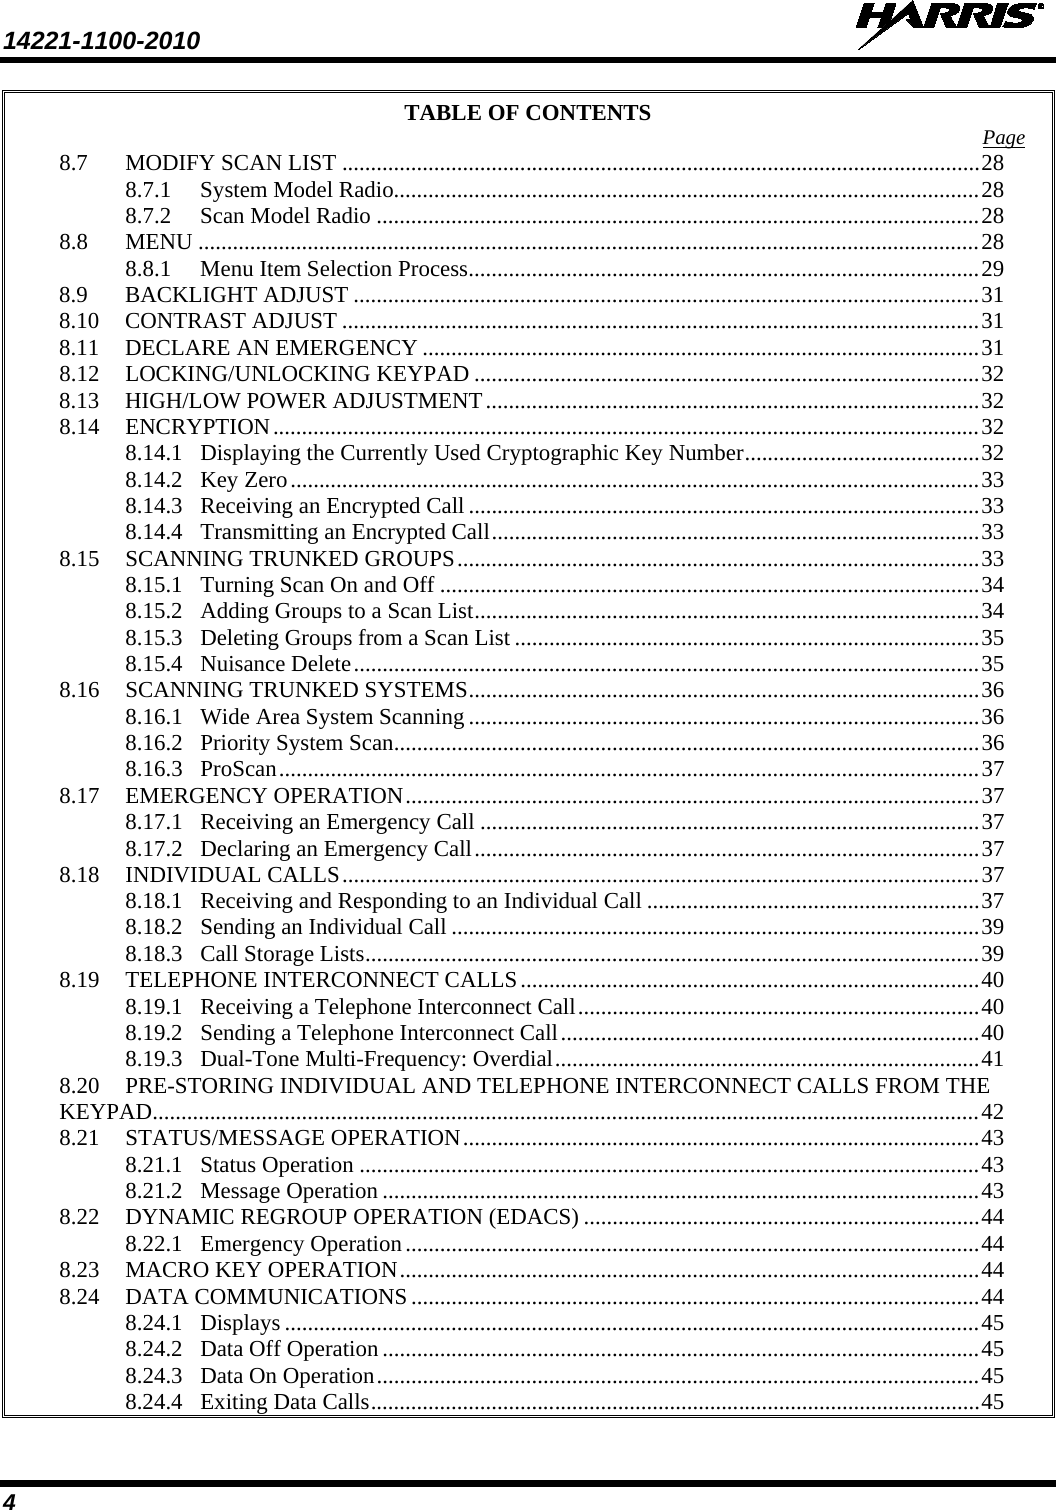 14221-1100-2010   4 TABLE OF CONTENTS Page 8.7 MODIFY SCAN LIST ............................................................................................................... 28 8.7.1 System Model Radio...................................................................................................... 28 8.7.2 Scan Model Radio ......................................................................................................... 28 8.8 MENU ........................................................................................................................................ 28 8.8.1 Menu Item Selection Process ......................................................................................... 29 8.9 BACKLIGHT ADJUST ............................................................................................................. 31 8.10 CONTRAST ADJUST ............................................................................................................... 31 8.11 DECLARE AN EMERGENCY ................................................................................................. 31 8.12 LOCKING/UNLOCKING KEYPAD ........................................................................................ 32 8.13 HIGH/LOW POWER ADJUSTMENT ...................................................................................... 32 8.14 ENCRYPTION ........................................................................................................................... 32 8.14.1 Displaying the Currently Used Cryptographic Key Number ......................................... 32 8.14.2 Key Zero ........................................................................................................................ 33 8.14.3 Receiving an Encrypted Call ......................................................................................... 33 8.14.4 Transmitting an Encrypted Call ..................................................................................... 33 8.15 SCANNING TRUNKED GROUPS ........................................................................................... 33 8.15.1 Turning Scan On and Off .............................................................................................. 34 8.15.2 Adding Groups to a Scan List ........................................................................................ 34 8.15.3 Deleting Groups from a Scan List ................................................................................. 35 8.15.4 Nuisance Delete ............................................................................................................. 35 8.16 SCANNING TRUNKED SYSTEMS ......................................................................................... 36 8.16.1 Wide Area System Scanning ......................................................................................... 36 8.16.2 Priority System Scan...................................................................................................... 36 8.16.3 ProScan .......................................................................................................................... 37 8.17 EMERGENCY OPERATION .................................................................................................... 37 8.17.1 Receiving an Emergency Call ....................................................................................... 37 8.17.2 Declaring an Emergency Call ........................................................................................ 37 8.18 INDIVIDUAL CALLS ............................................................................................................... 37 8.18.1 Receiving and Responding to an Individual Call .......................................................... 37 8.18.2 Sending an Individual Call ............................................................................................ 39 8.18.3 Call Storage Lists ........................................................................................................... 39 8.19 TELEPHONE INTERCONNECT CALLS ................................................................................ 40 8.19.1 Receiving a Telephone Interconnect Call ...................................................................... 40 8.19.2 Sending a Telephone Interconnect Call ......................................................................... 40 8.19.3 Dual-Tone Multi-Frequency: Overdial .......................................................................... 41 8.20 PRE-STORING INDIVIDUAL AND TELEPHONE INTERCONNECT CALLS FROM THE KEYPAD................................................................................................................................................ 42 8.21 STATUS/MESSAGE OPERATION .......................................................................................... 43 8.21.1 Status Operation ............................................................................................................ 43 8.21.2 Message Operation ........................................................................................................ 43 8.22 DYNAMIC REGROUP OPERATION (EDACS) ..................................................................... 44 8.22.1 Emergency Operation .................................................................................................... 44 8.23 MACRO KEY OPERATION ..................................................................................................... 44 8.24 DATA COMMUNICATIONS ................................................................................................... 44 8.24.1 Displays ......................................................................................................................... 45 8.24.2 Data Off Operation ........................................................................................................ 45 8.24.3 Data On Operation ......................................................................................................... 45 8.24.4 Exiting Data Calls .......................................................................................................... 45 